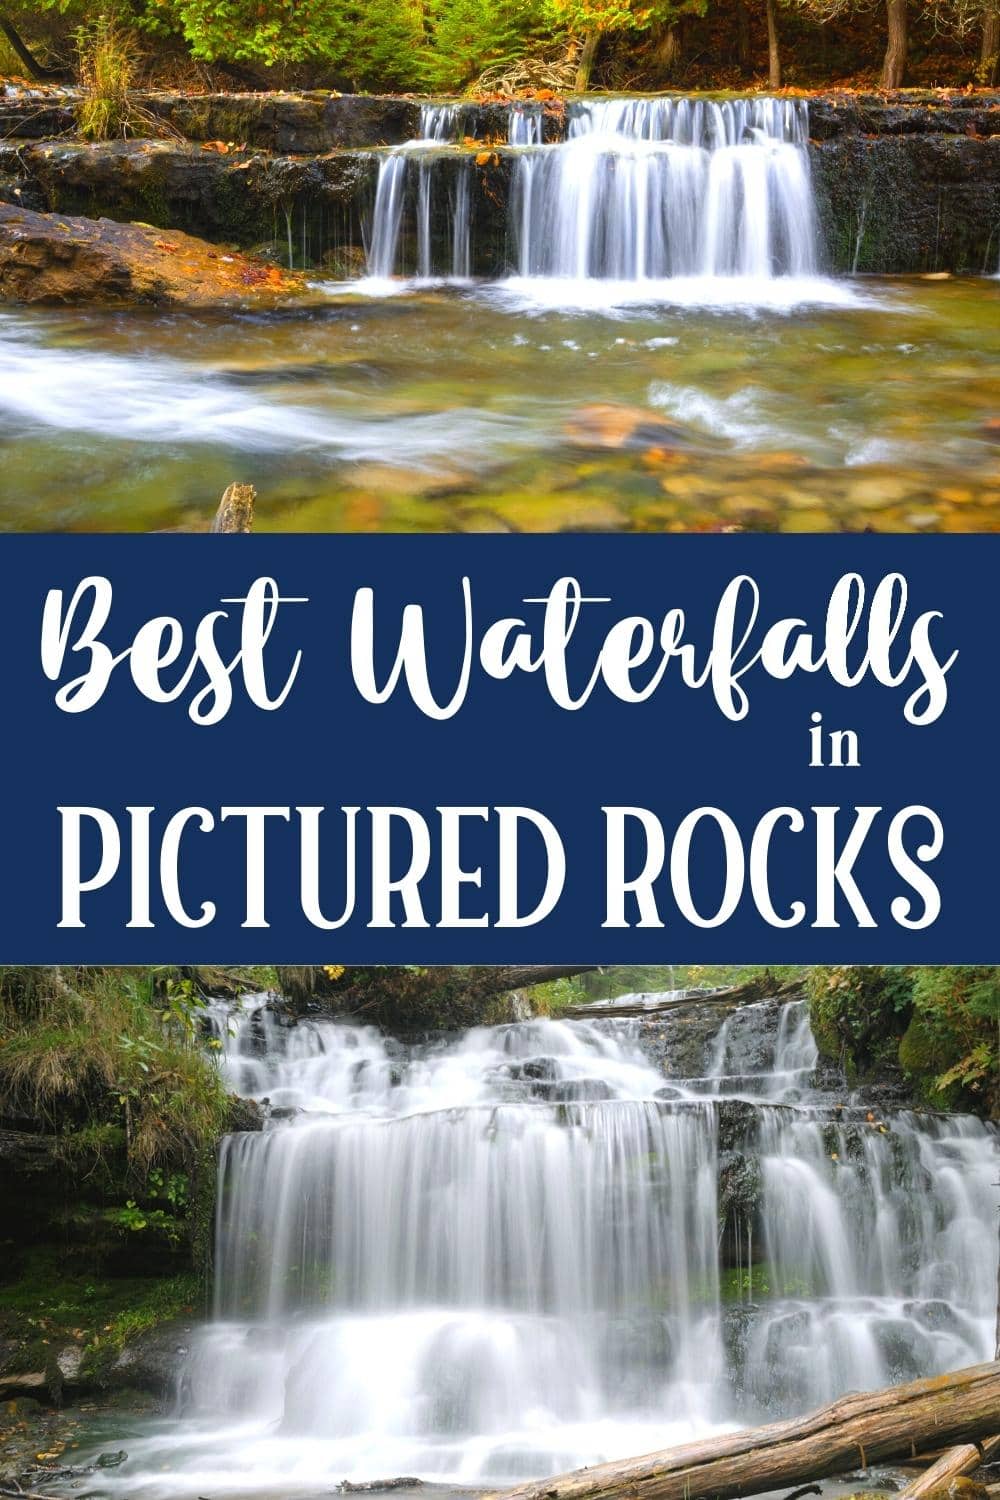 14 Best Pictured Rocks Waterfalls You Can’t Miss